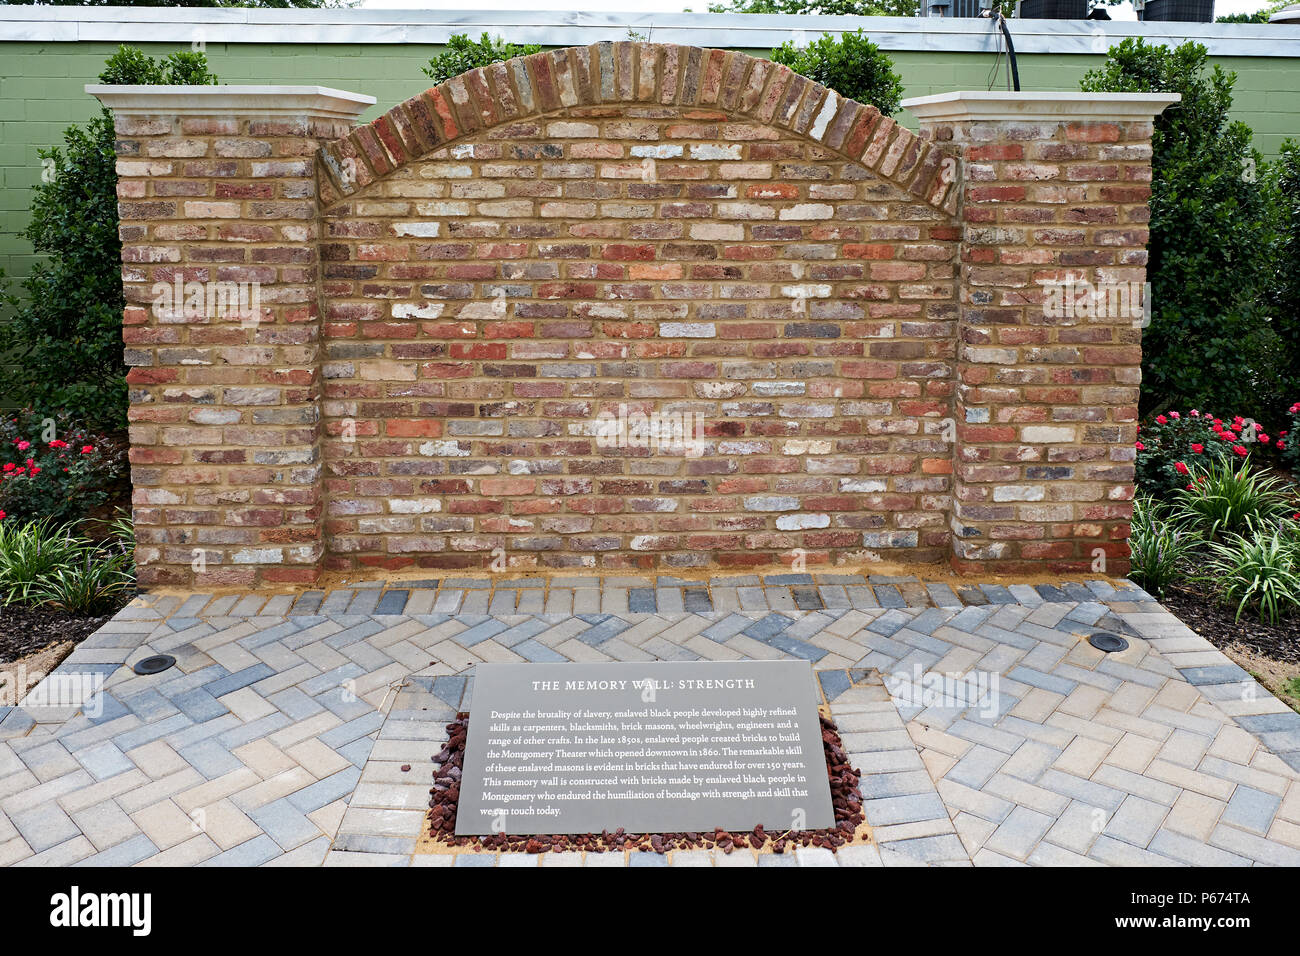 The grounds and Memory Wall at The National Memorial for Peace and Justice museum and monument in Montgomery Alabama, USA, a civil rights landmark. Stock Photo